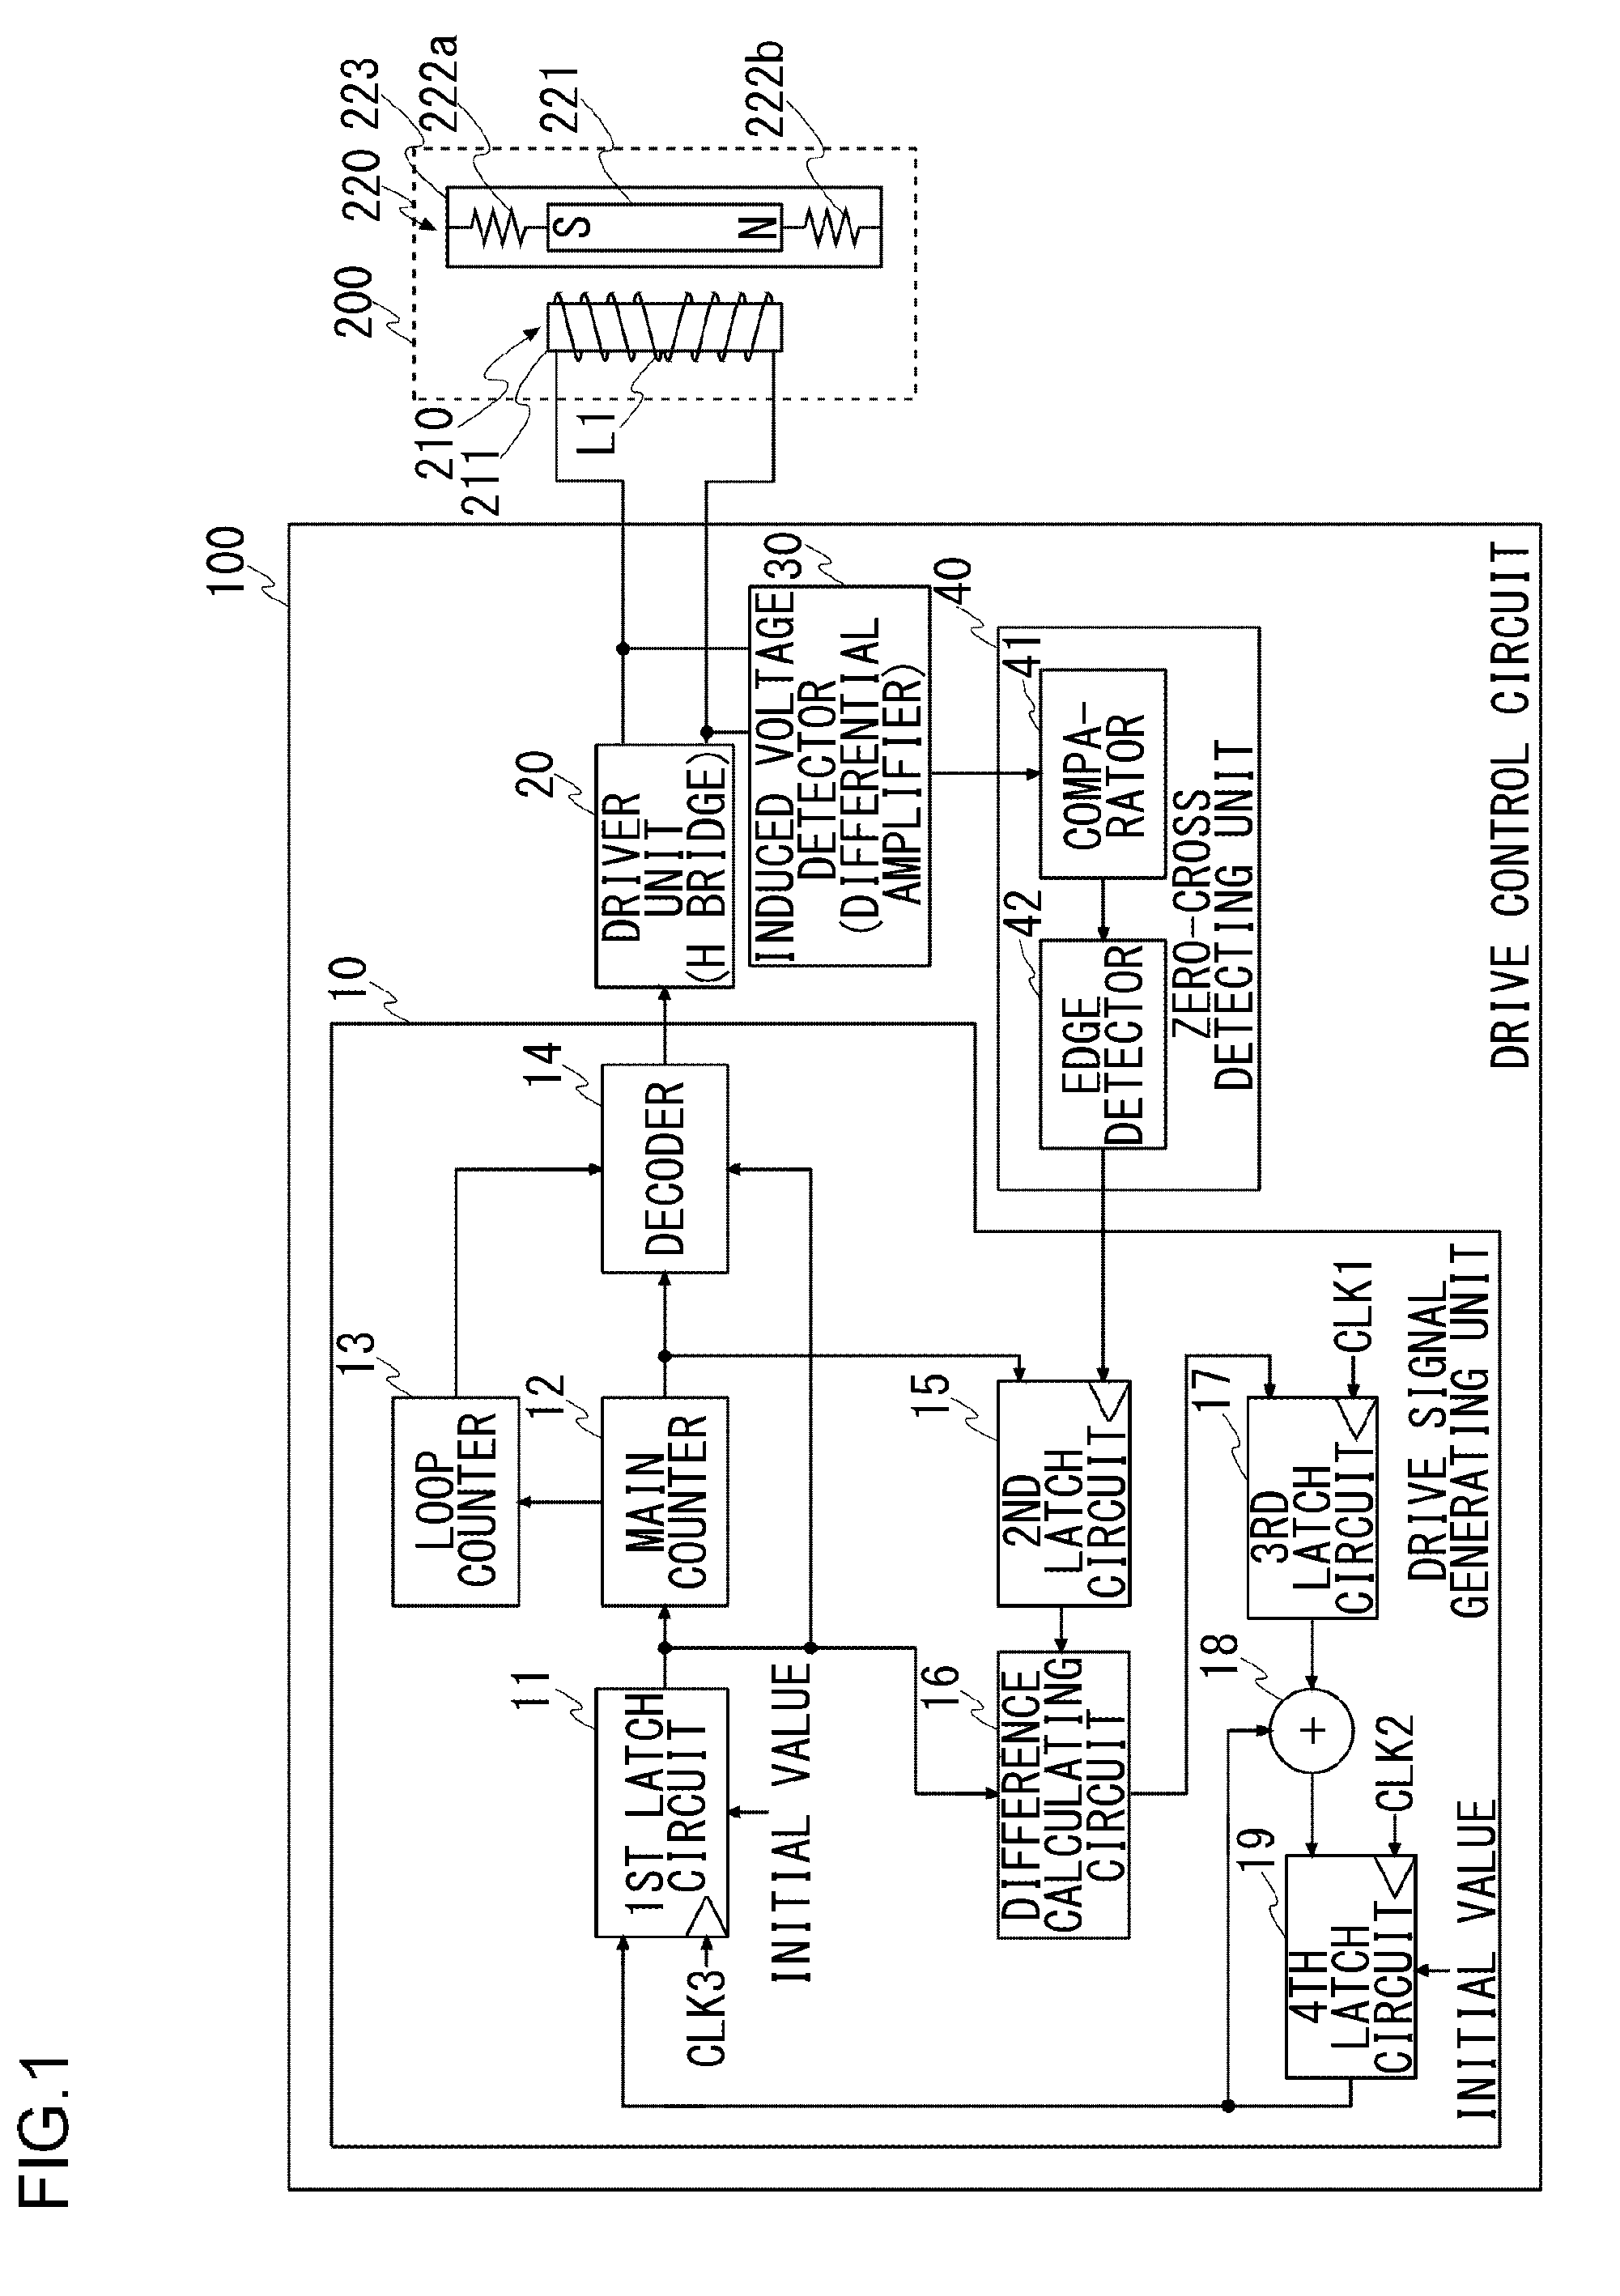 Drive control circuit for linear vibration motor